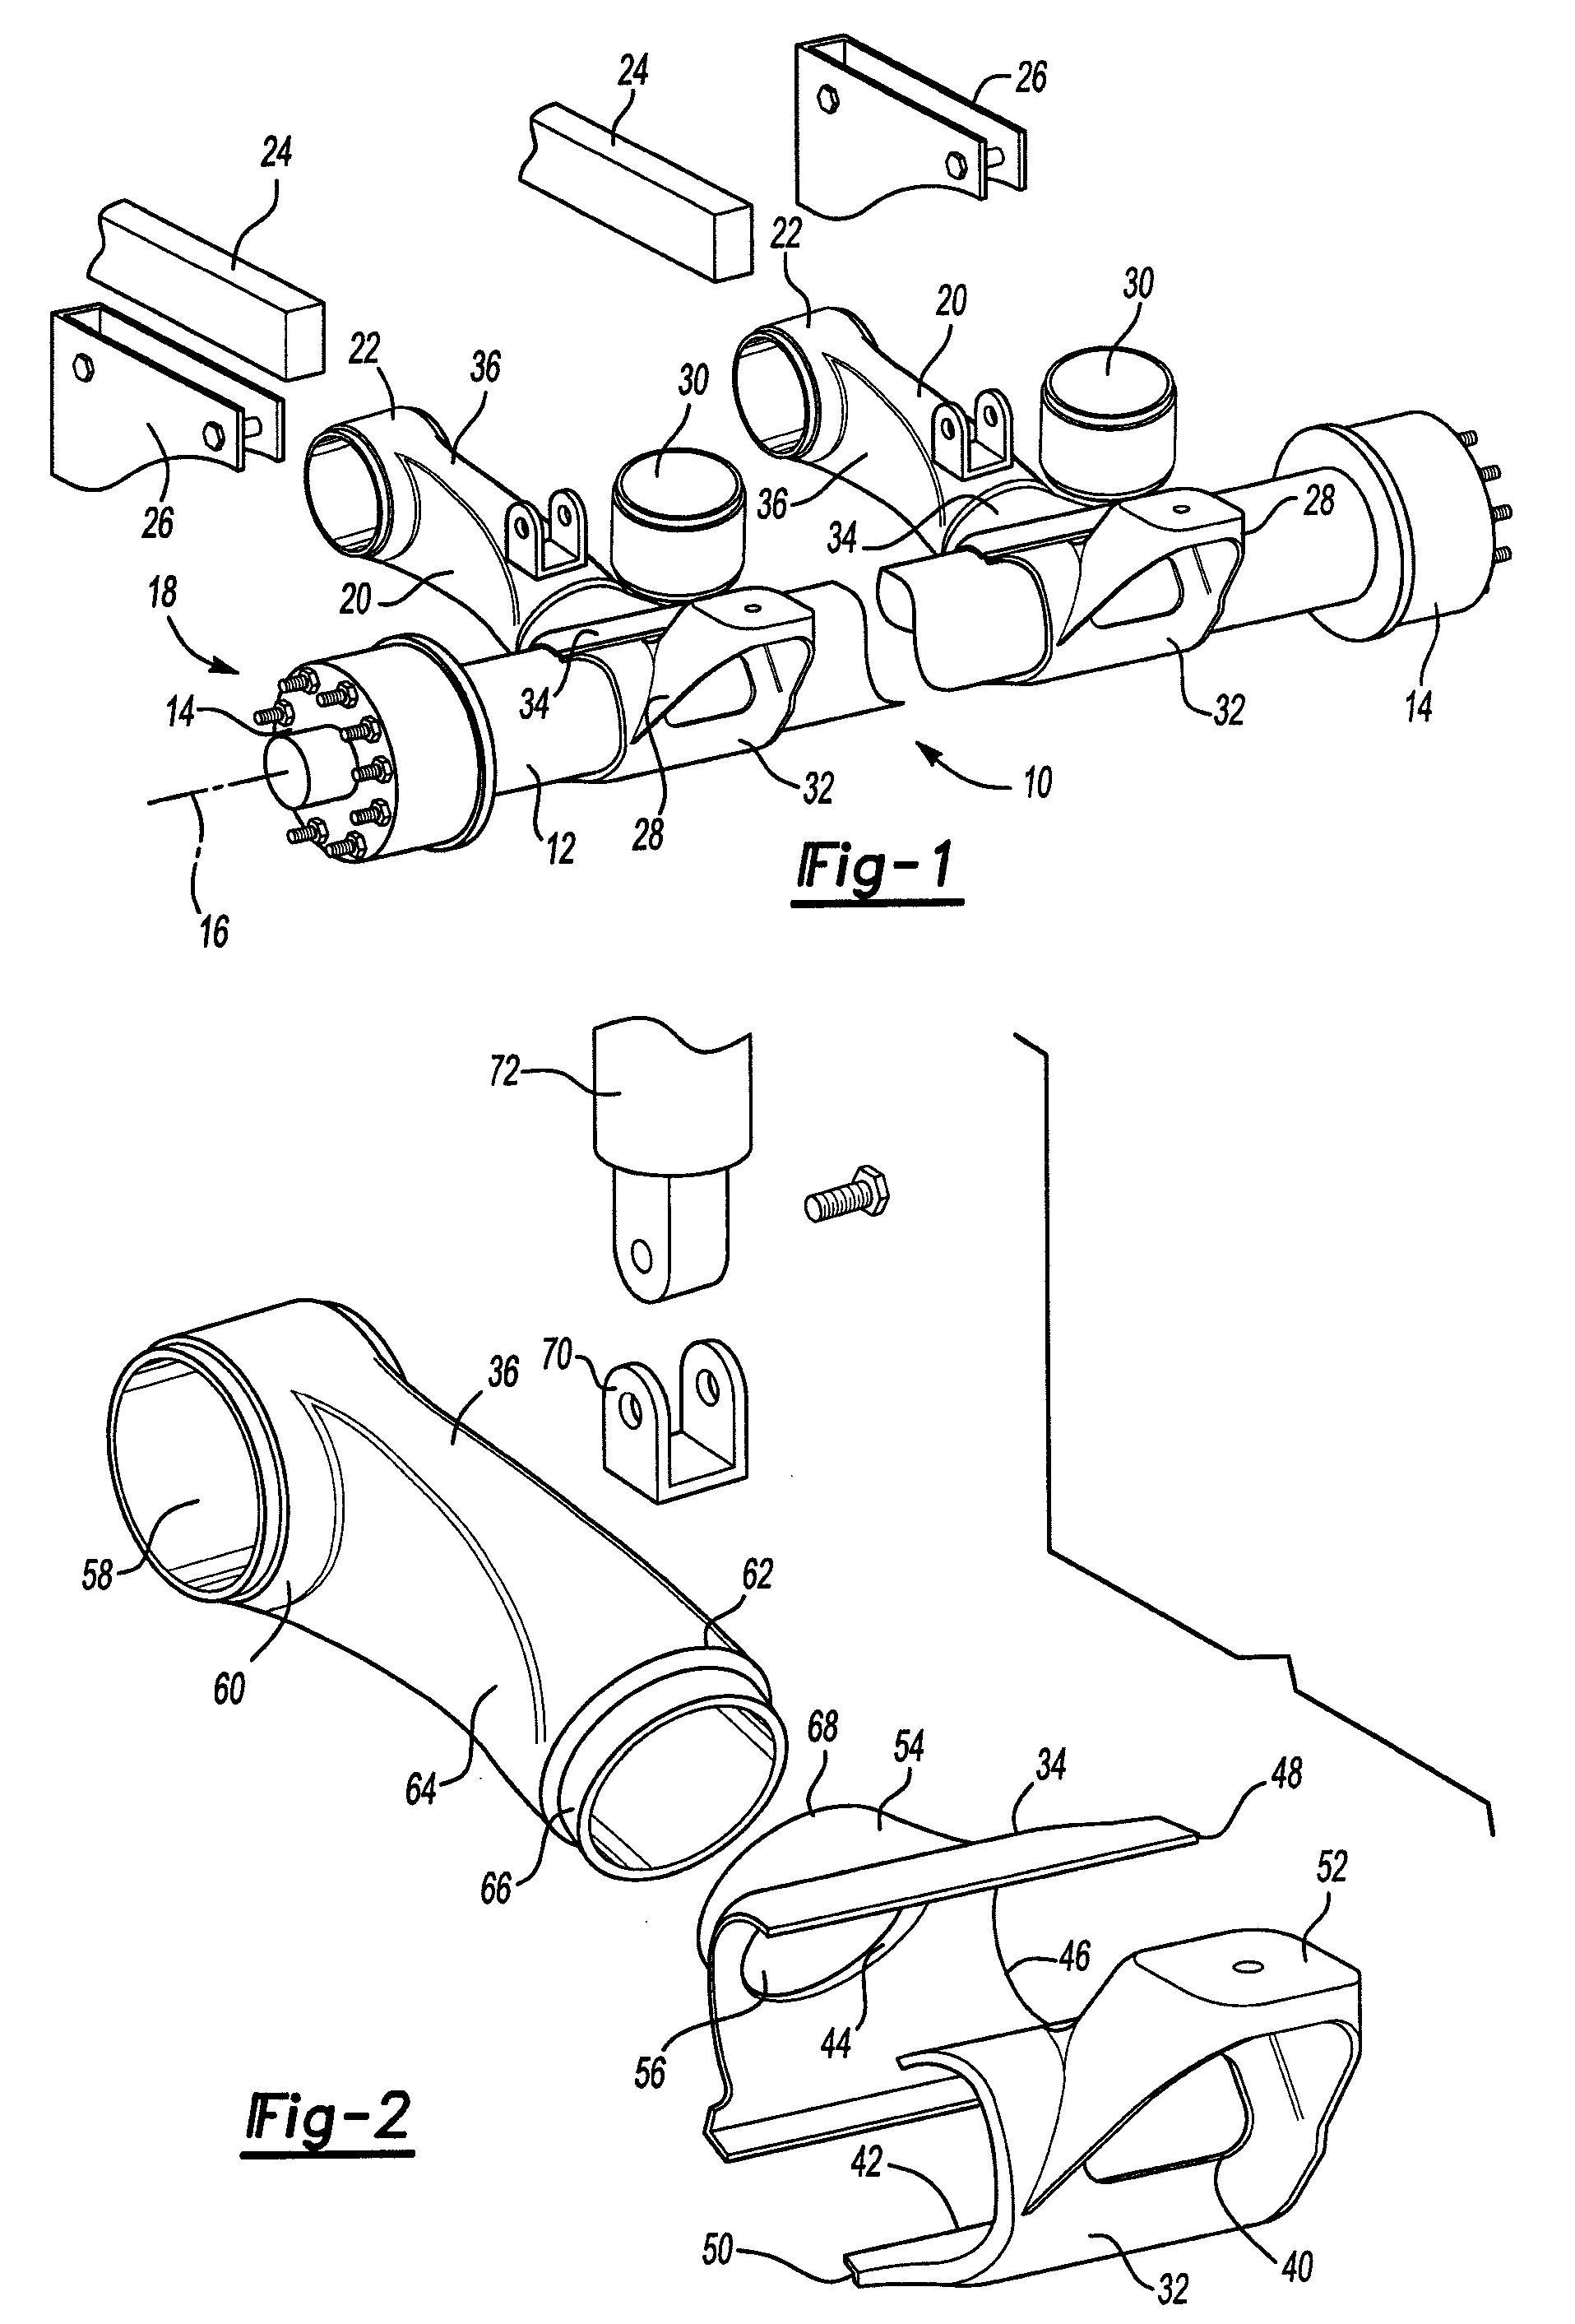 Cast trailing arm assembly for trailer suspension